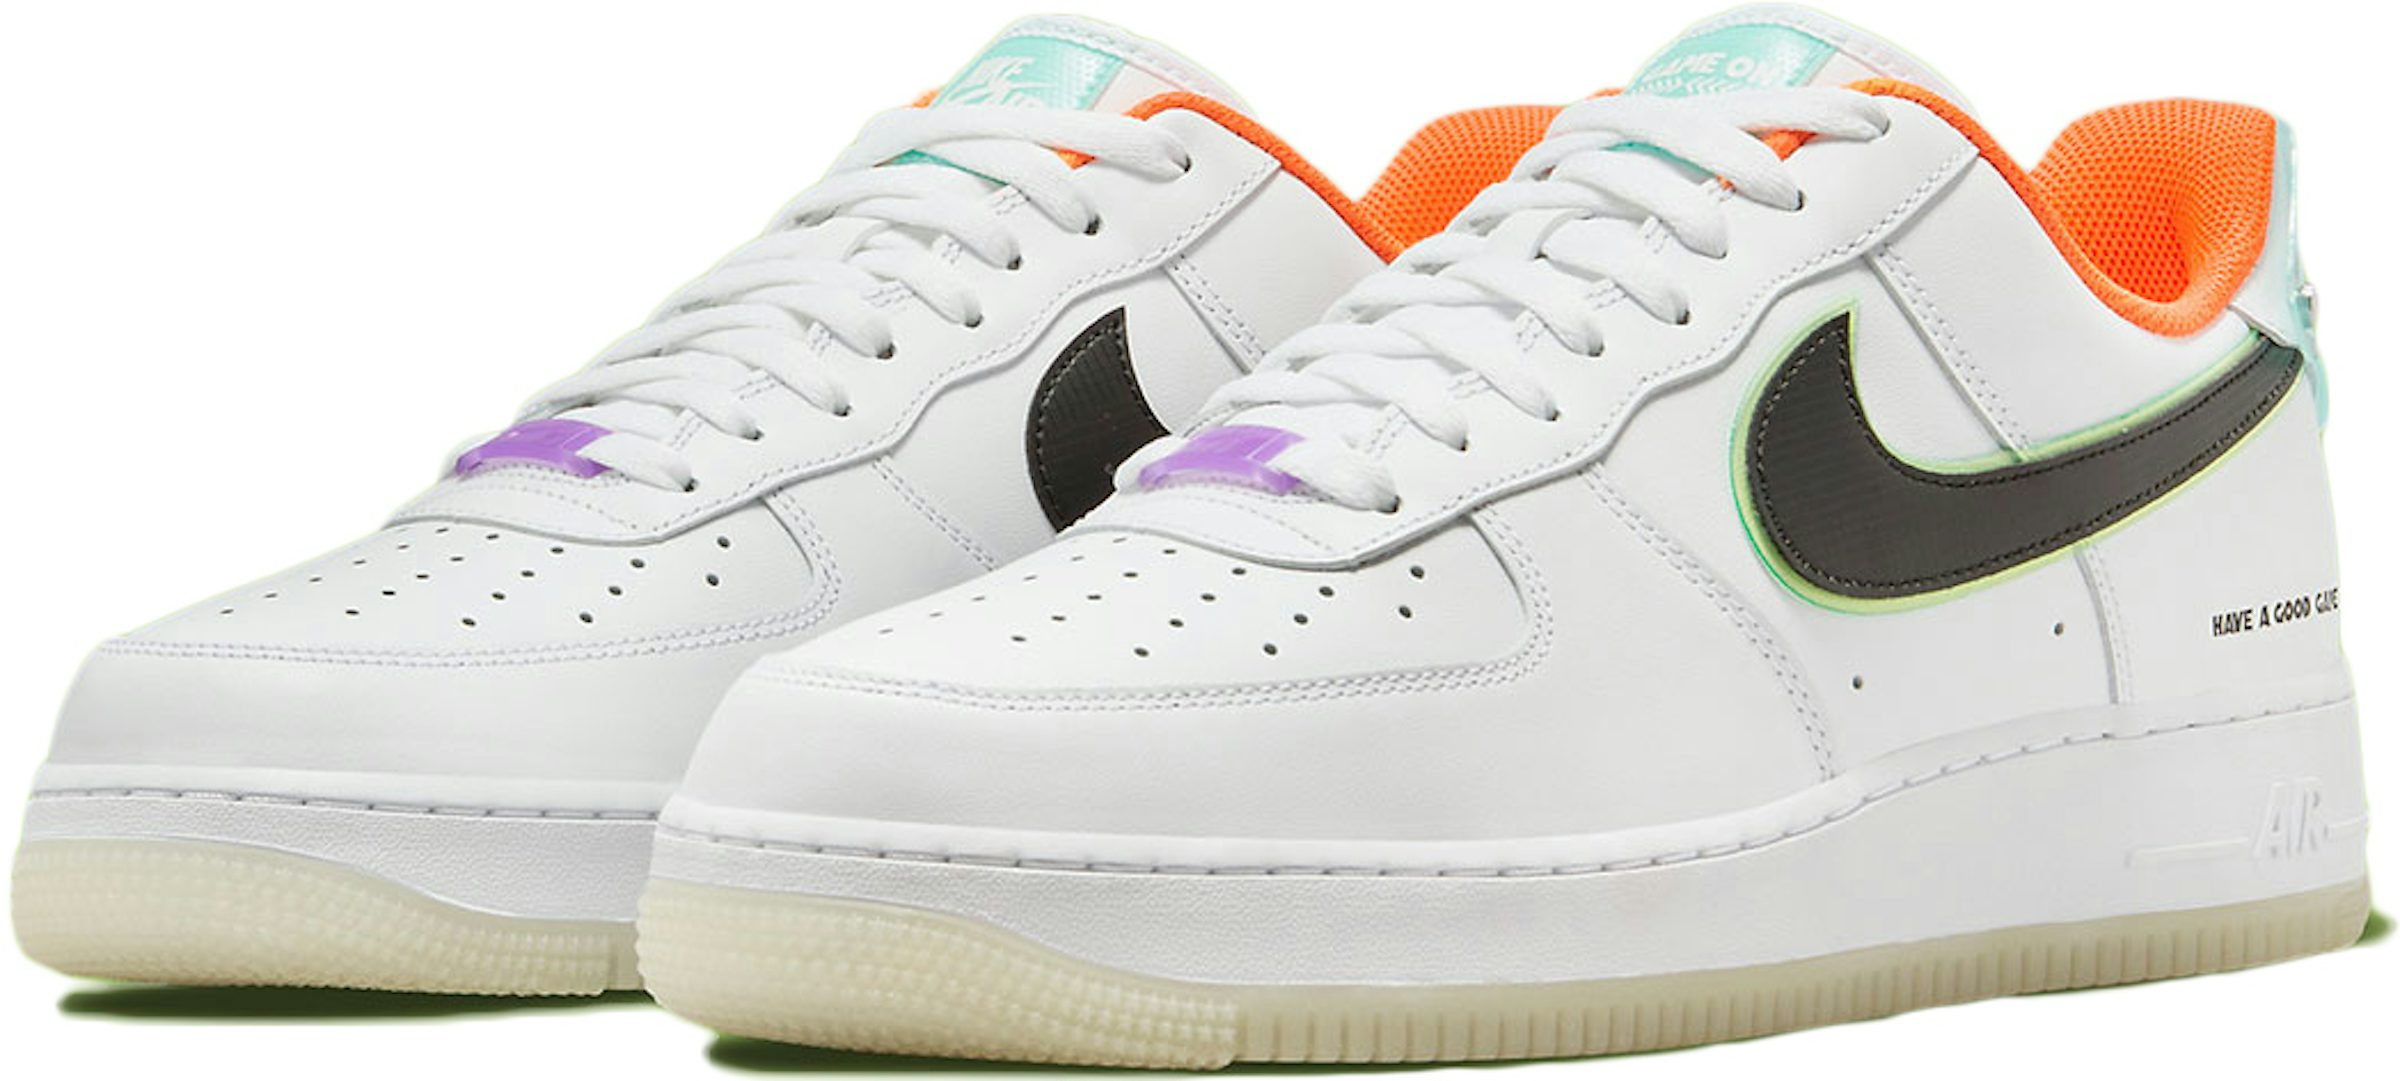 Air Force 1 Low Premium 'NYC: City of Athletes' Release Date. Nike